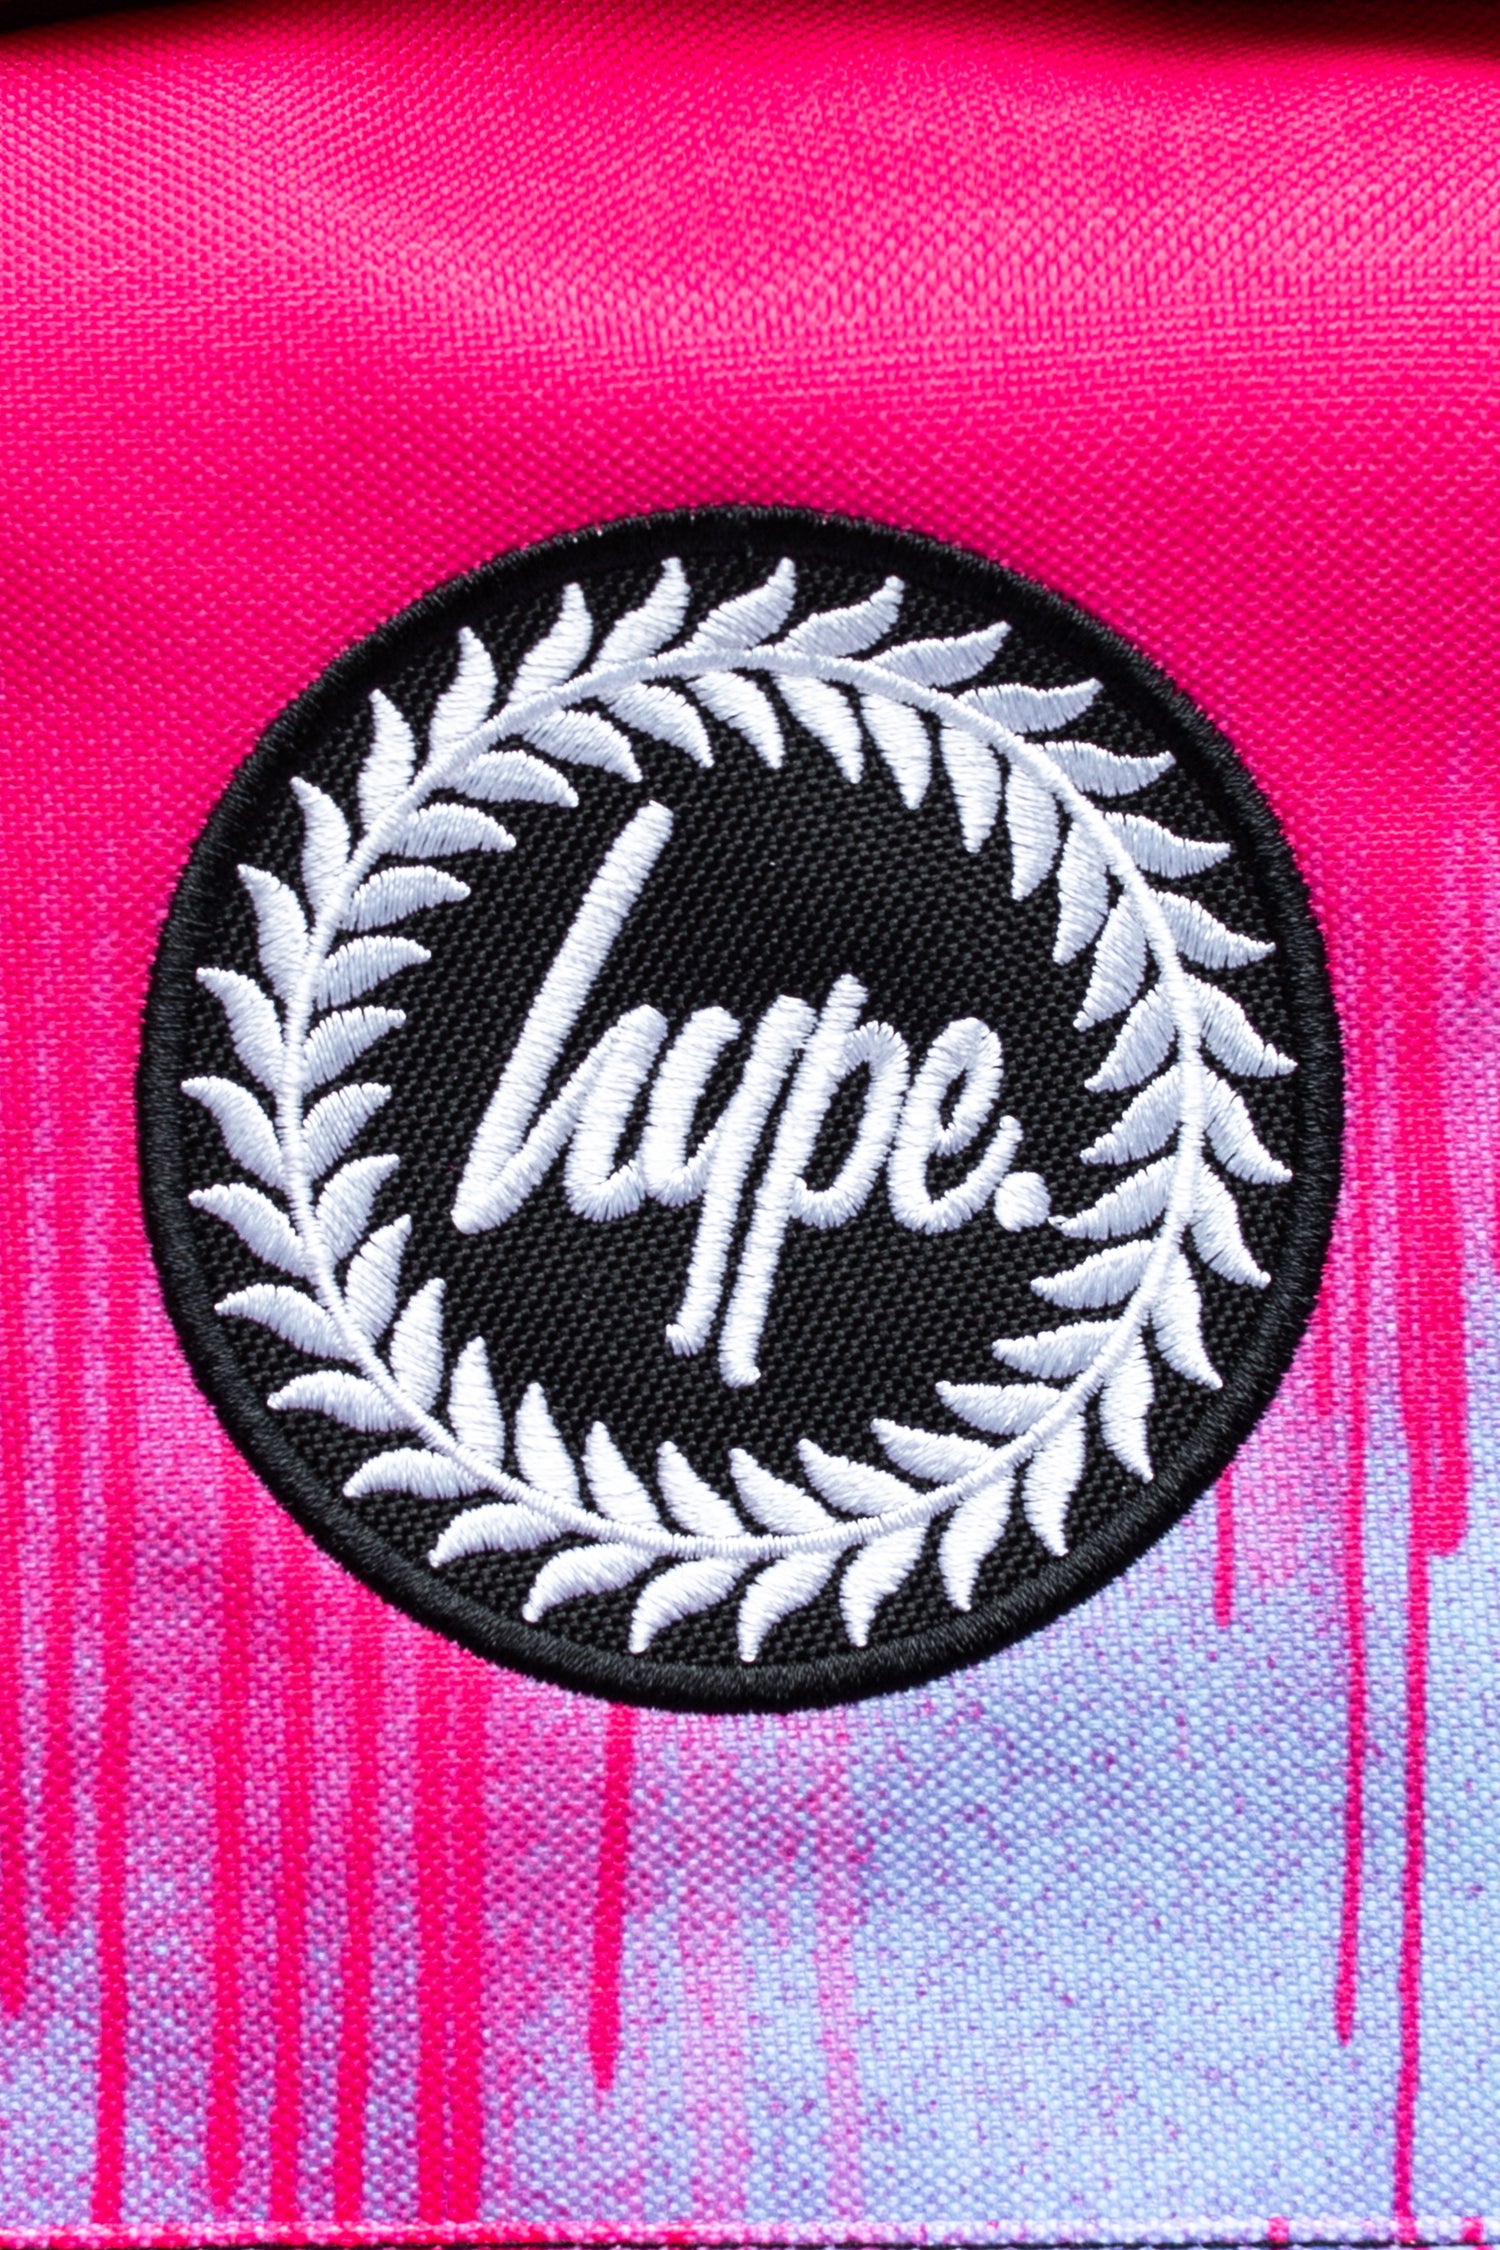 HYPE UNISEX PINK DRIP CREST BACKPACK